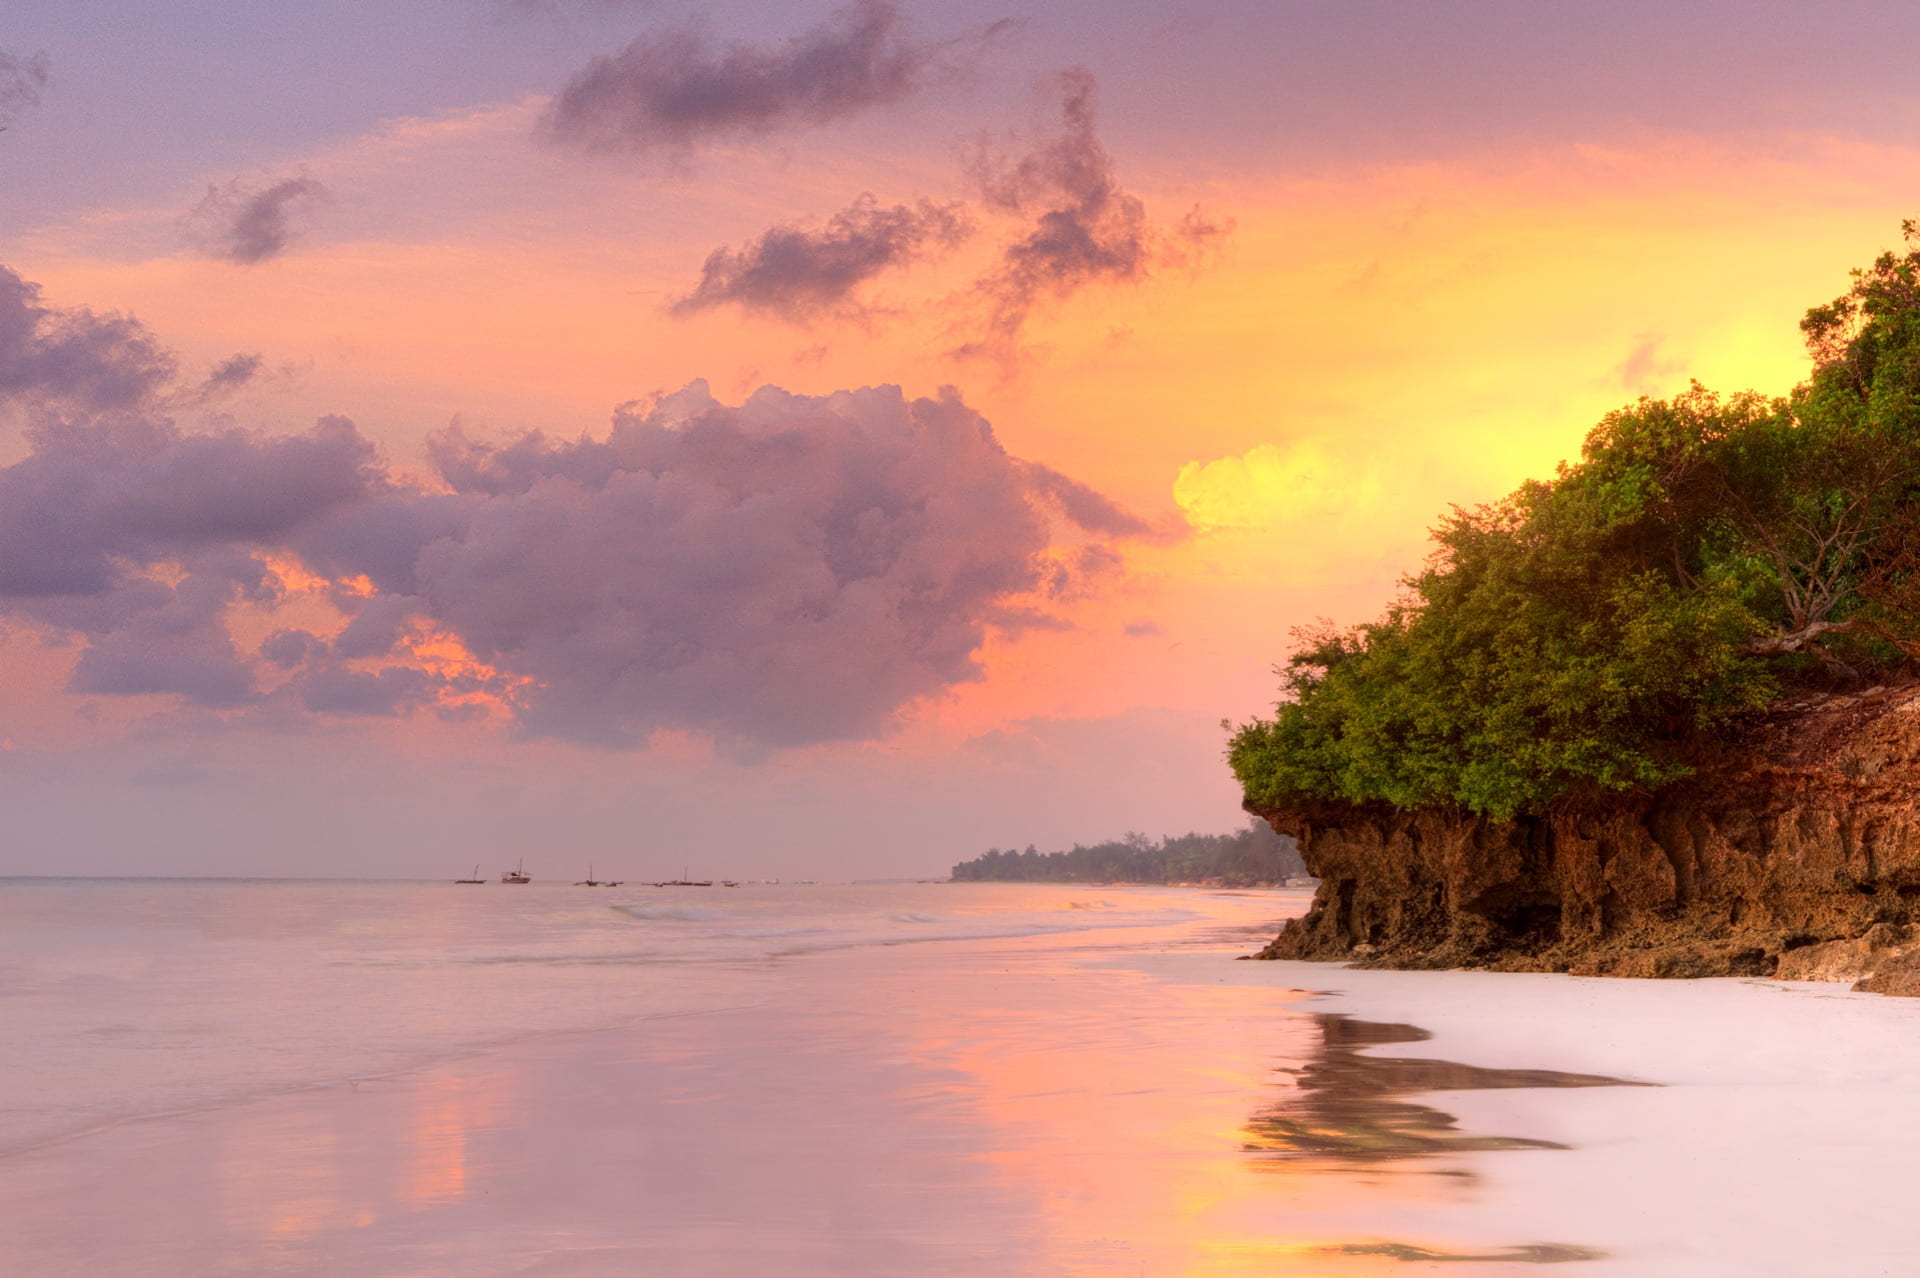 An image of Diani Beach in Kenya to showcase some of the natural beauty of the nation